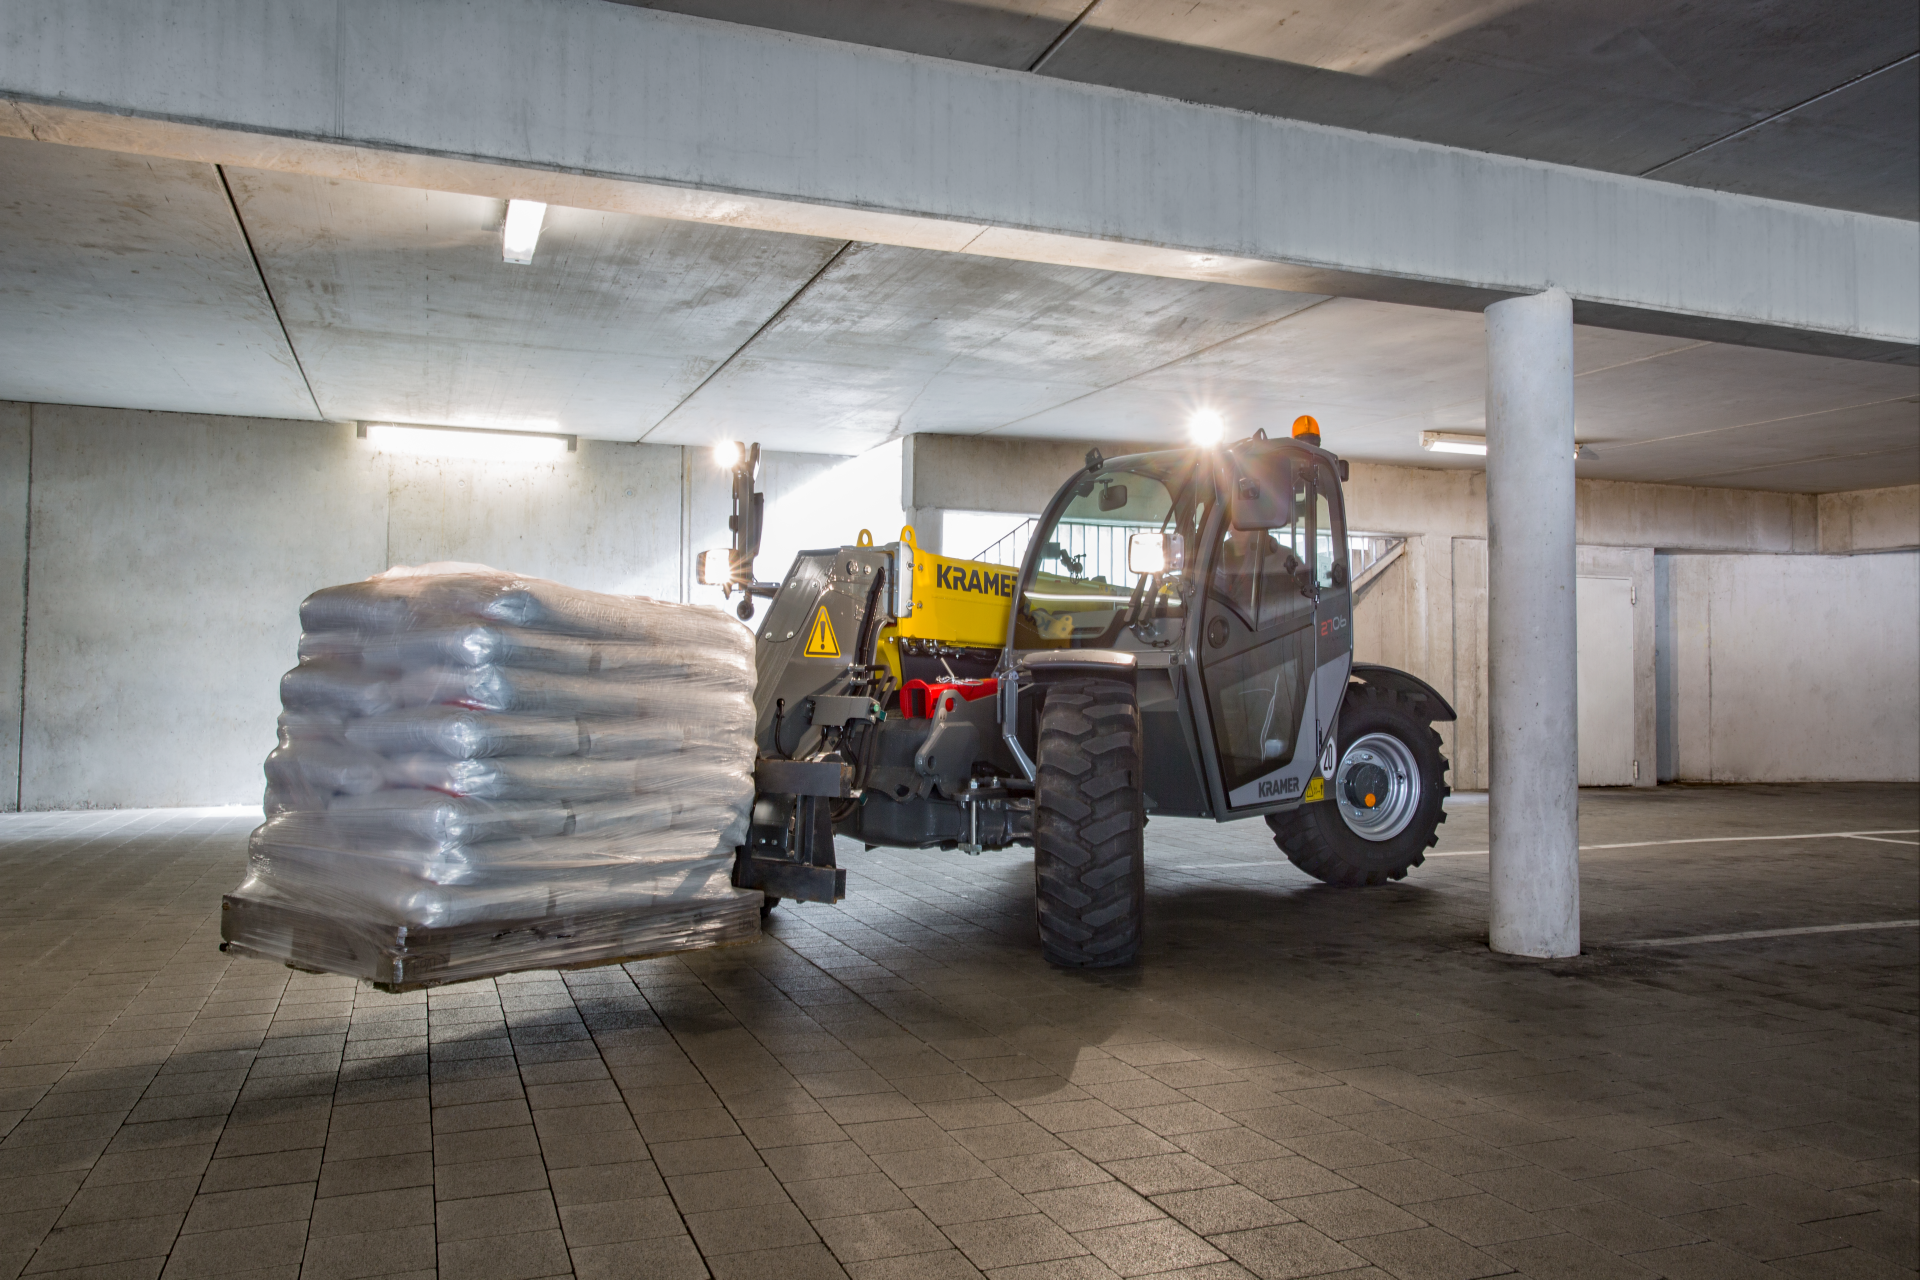 The efficient compact genius 2706 while transporting a pallet in the underground car park.